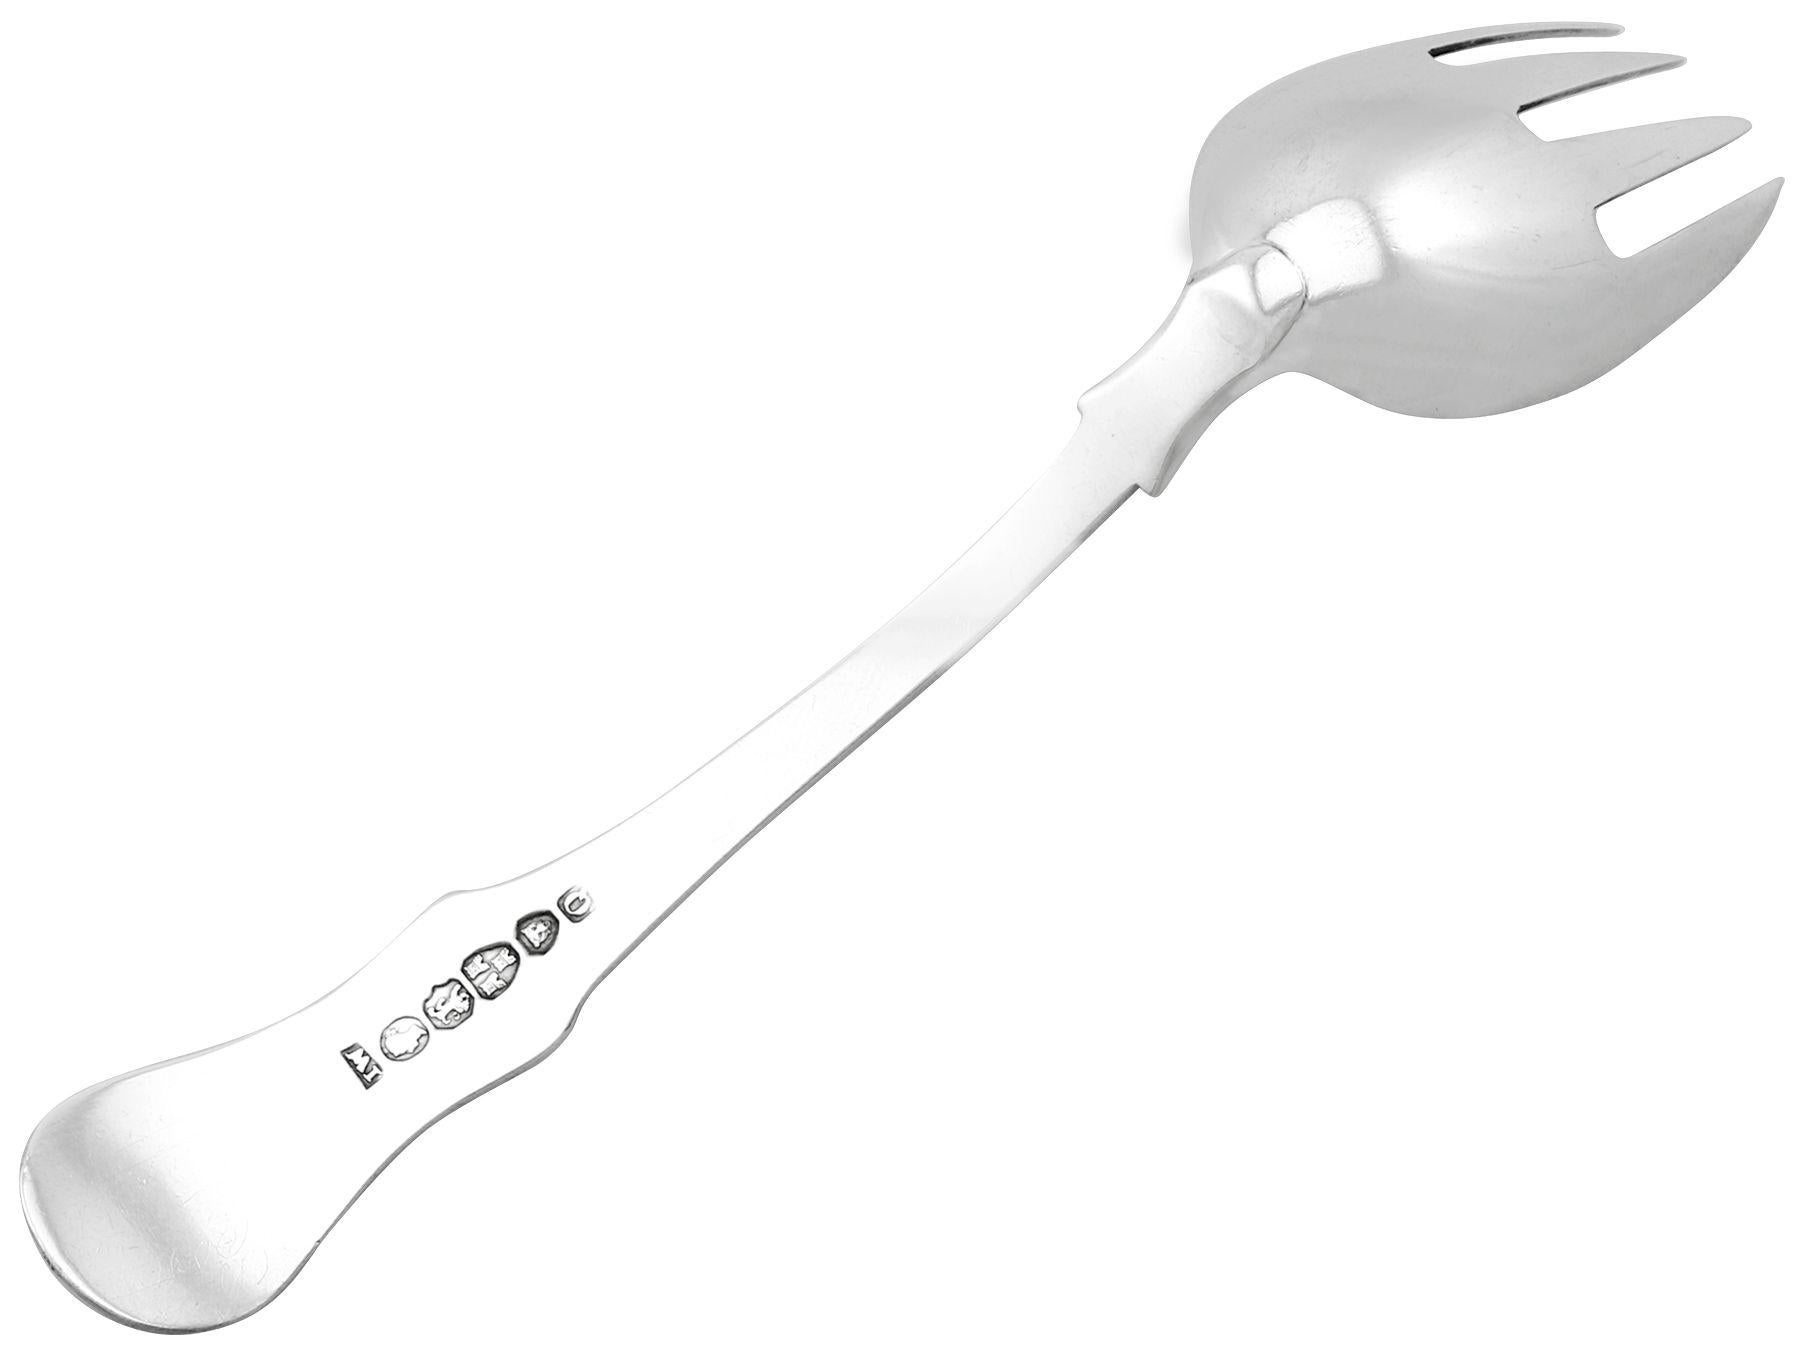 what is a runcible spoon used for